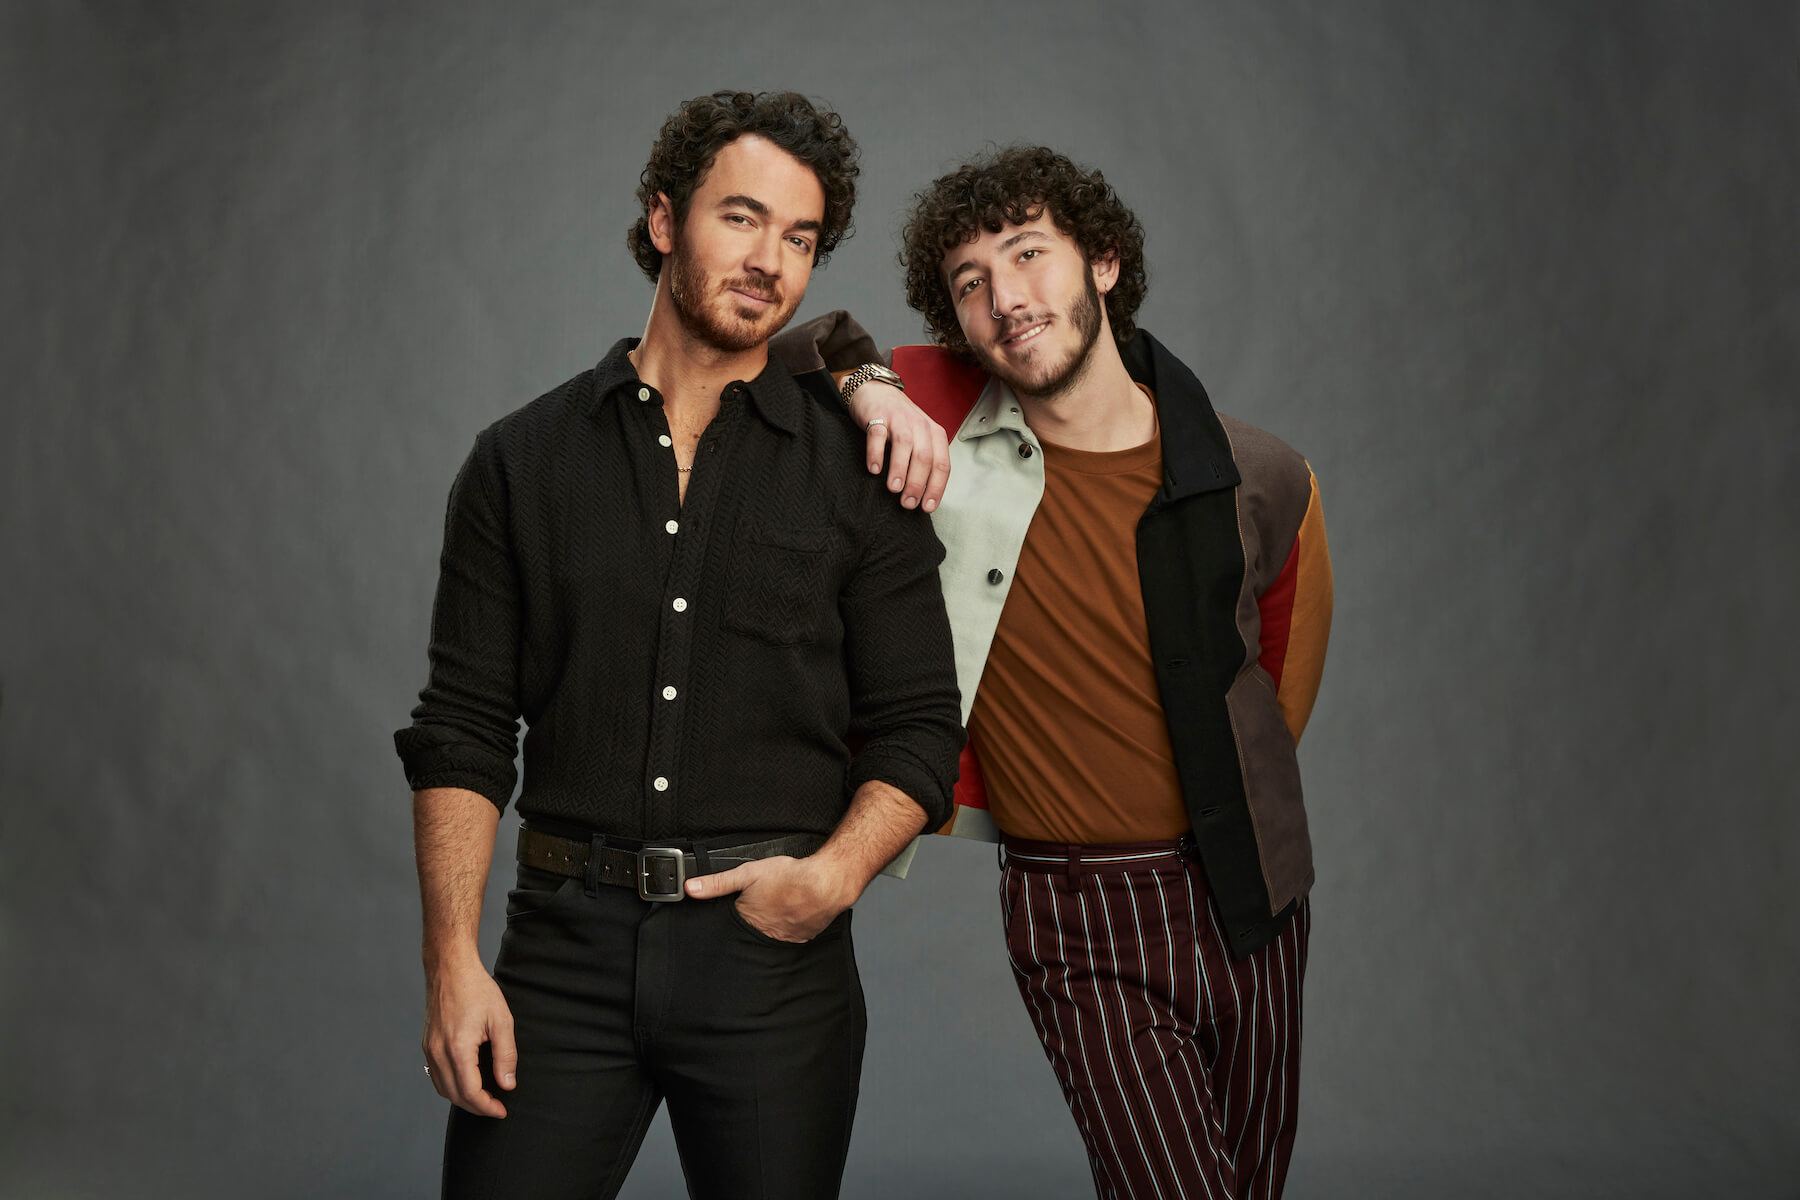 Kevin and Franklin Jonas from 'Claim to Fame' Season 2 leaning on each other